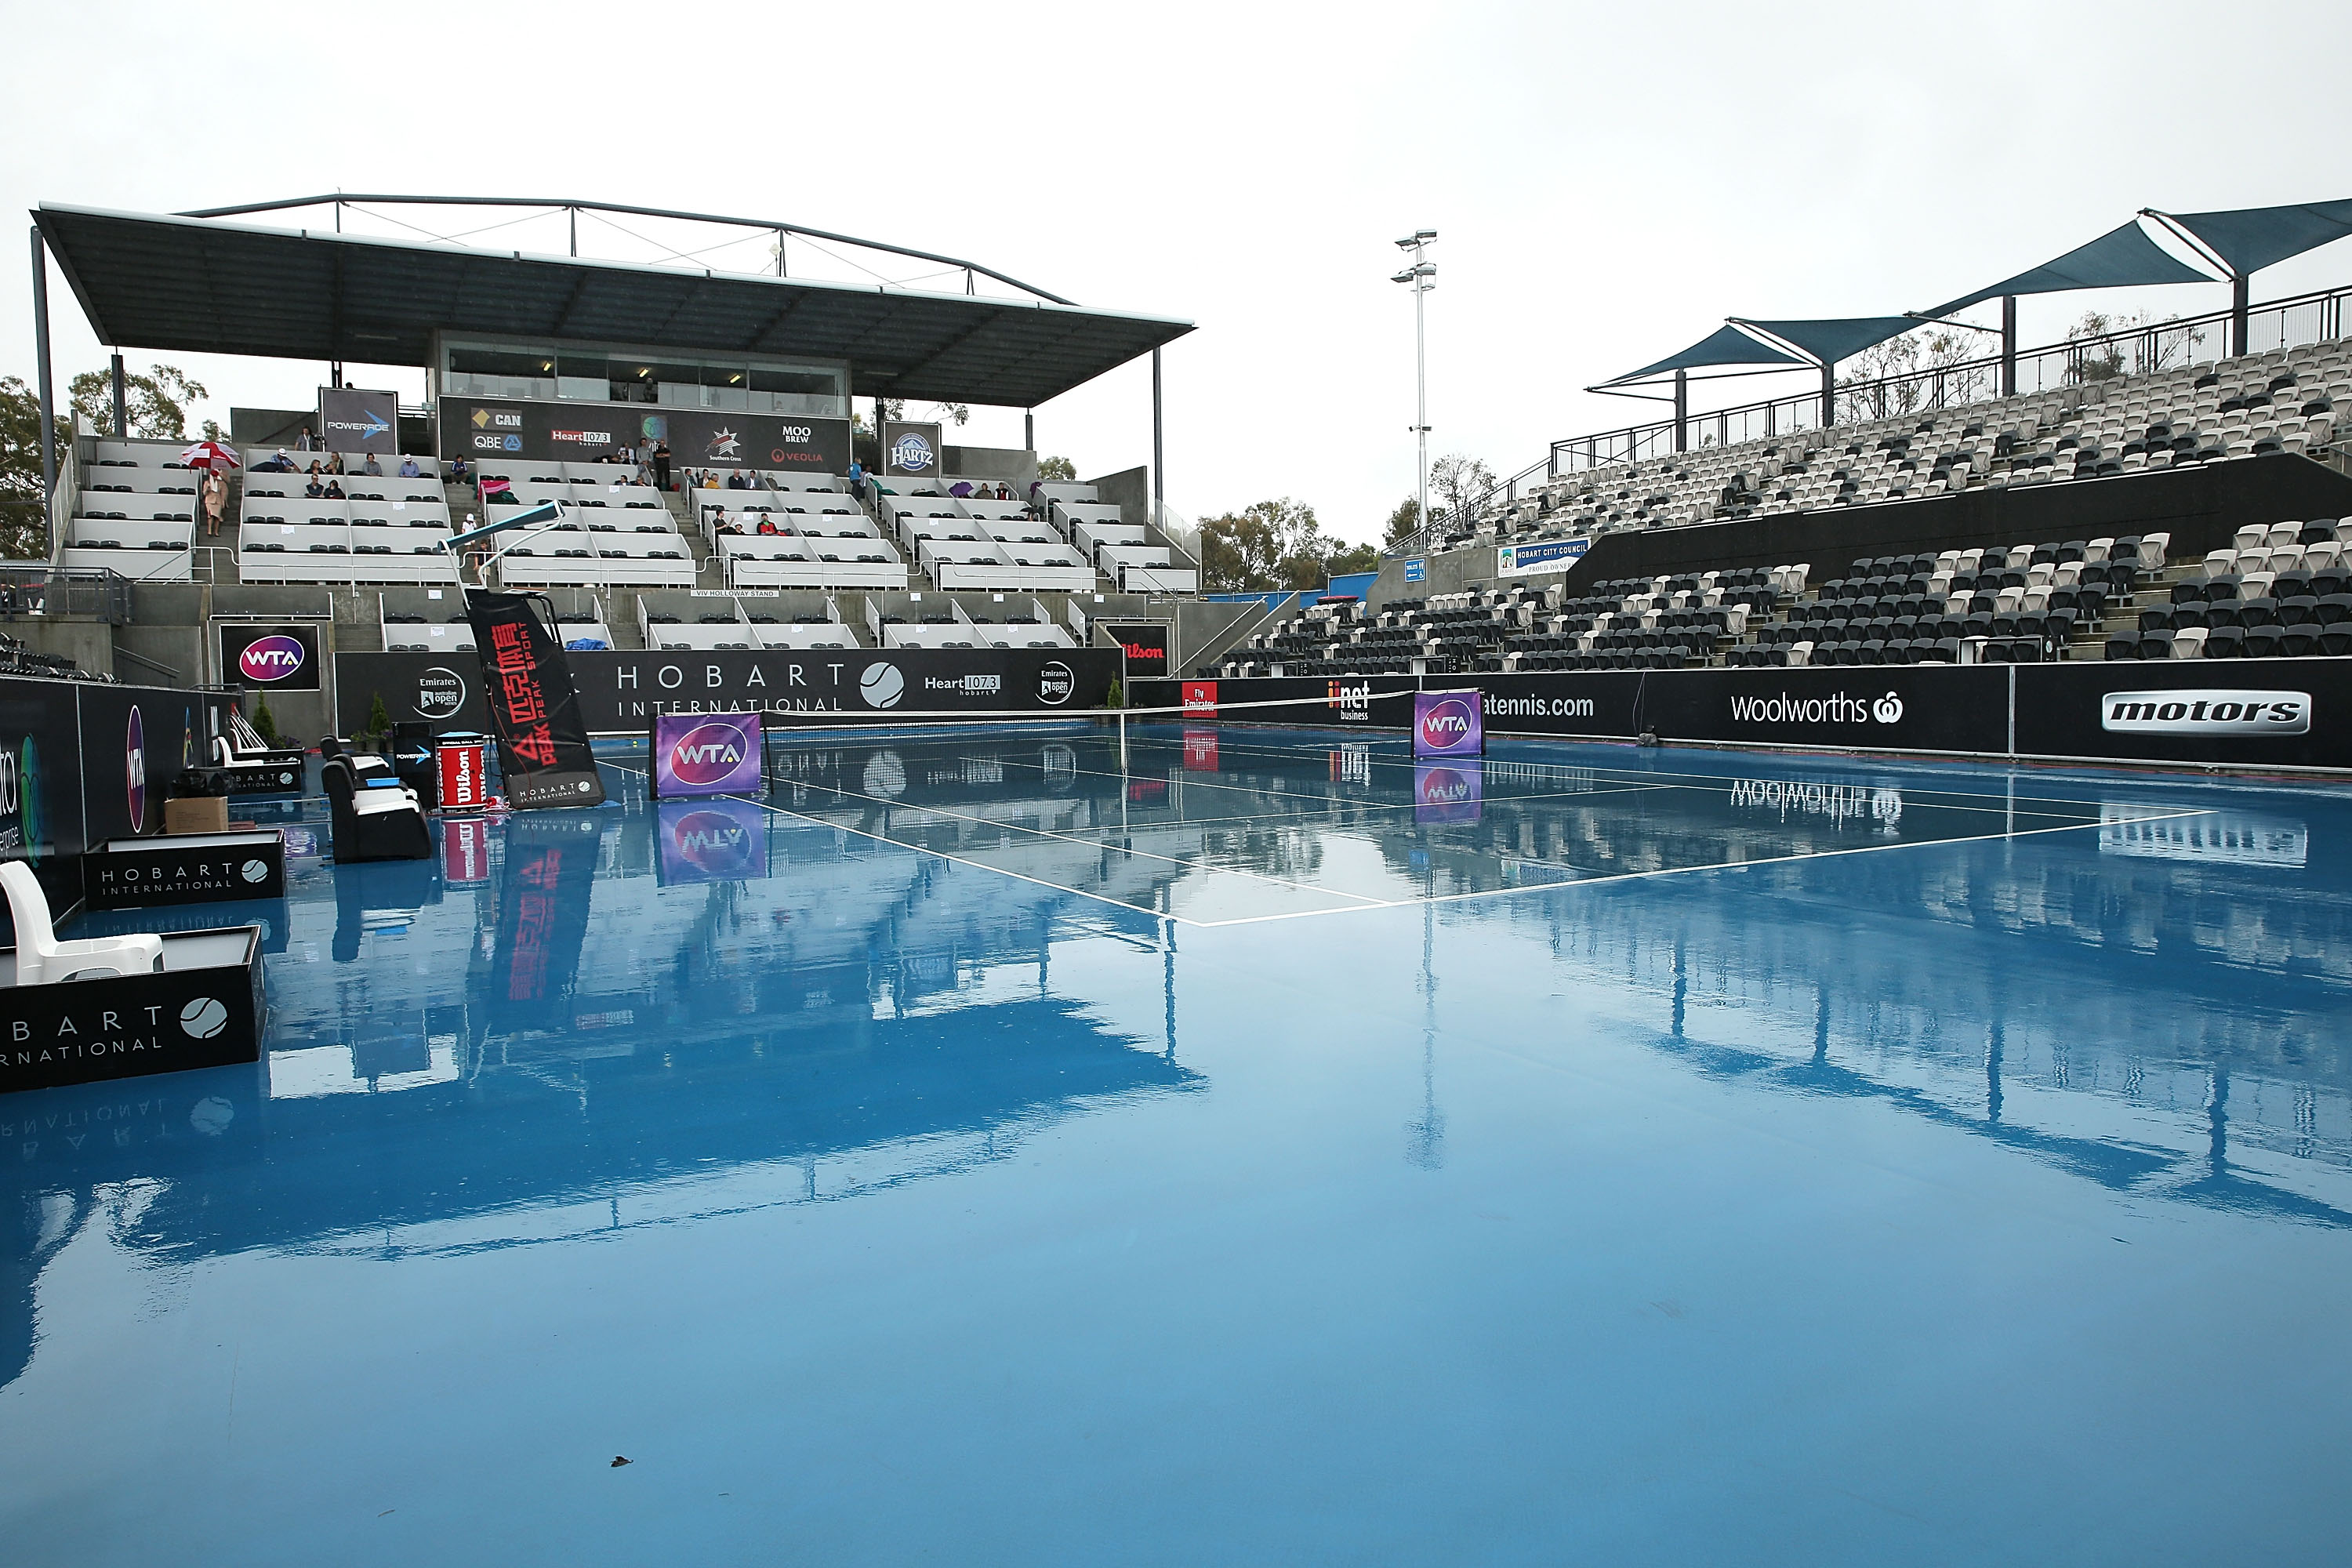 Wednesday weather update: Day and Night sessions cancelled - Hobart International - 14 ...3000 x 2000